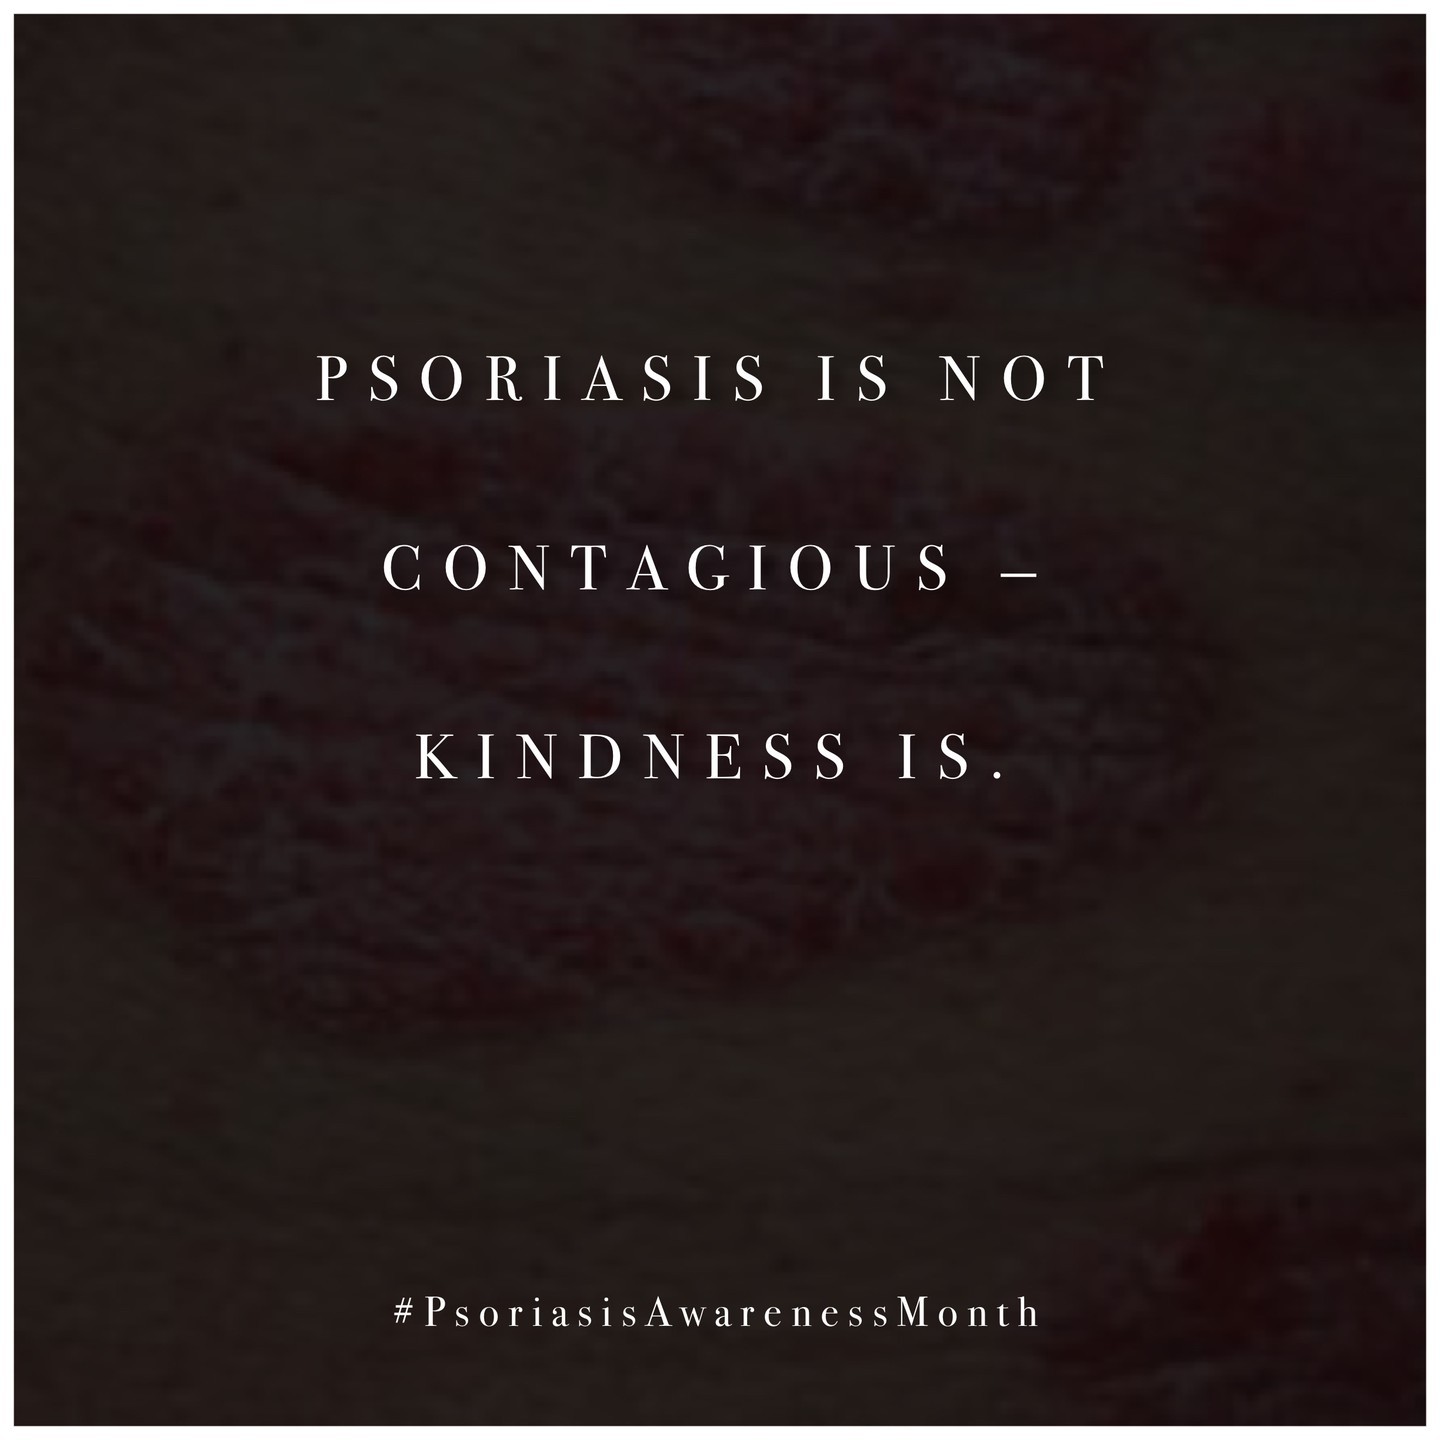 Psoriasis is not contagious. Kindness is. Learn more about the condition at VMVinSKIN.com to help support a loved one with psoriasis (including yourself! 💜💛)

#ThoughtfulThursday #skintellectual #psoriasis #psoriasisawareness #SavingTheWorldsSkin